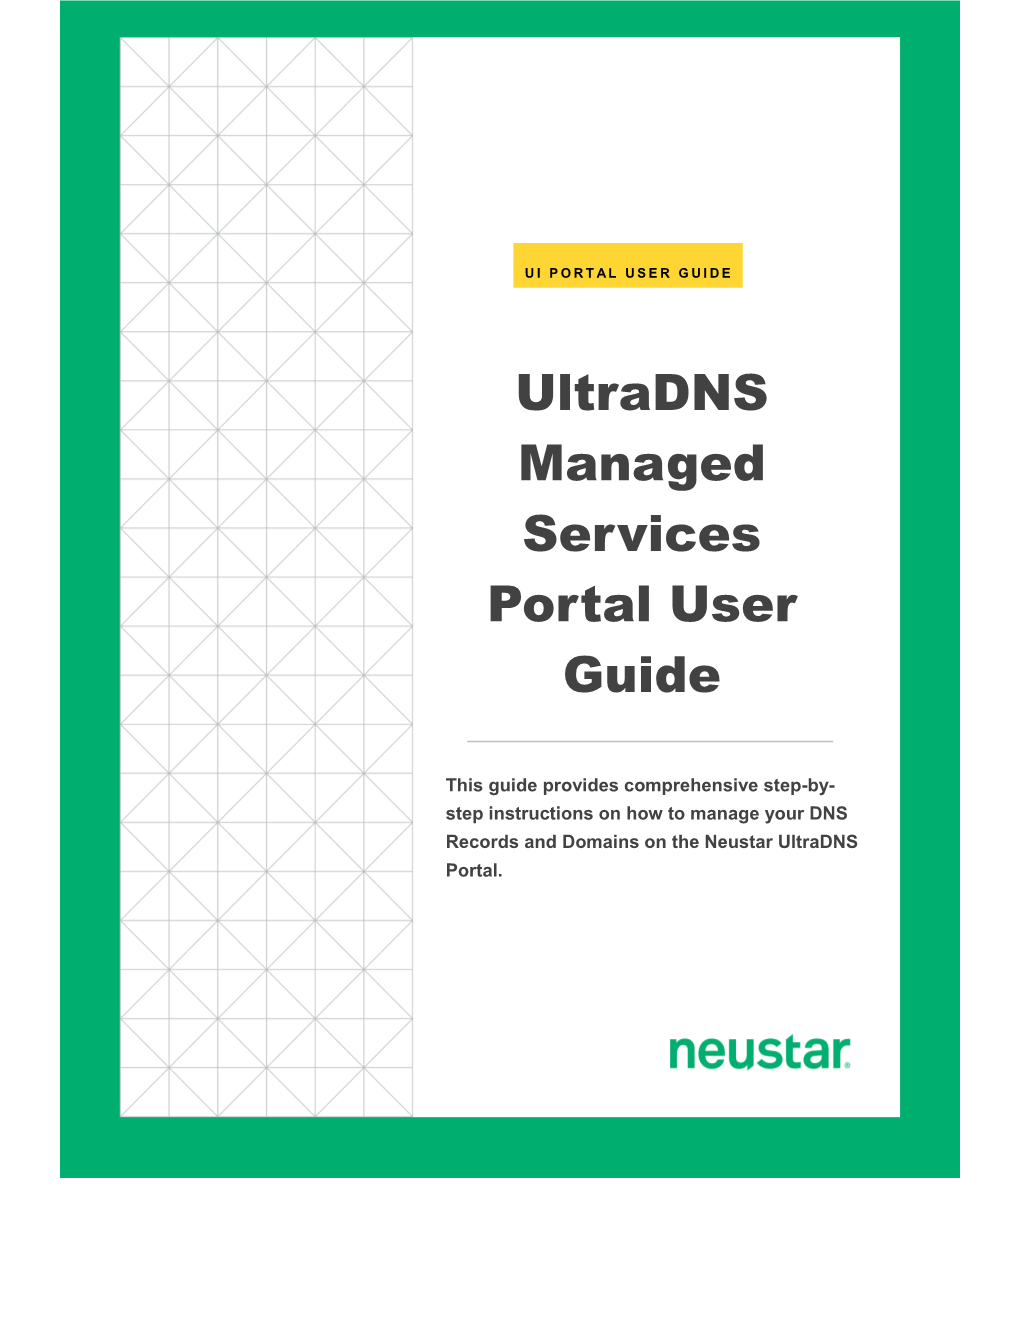 Ultradns Managed Services Portal User Guide